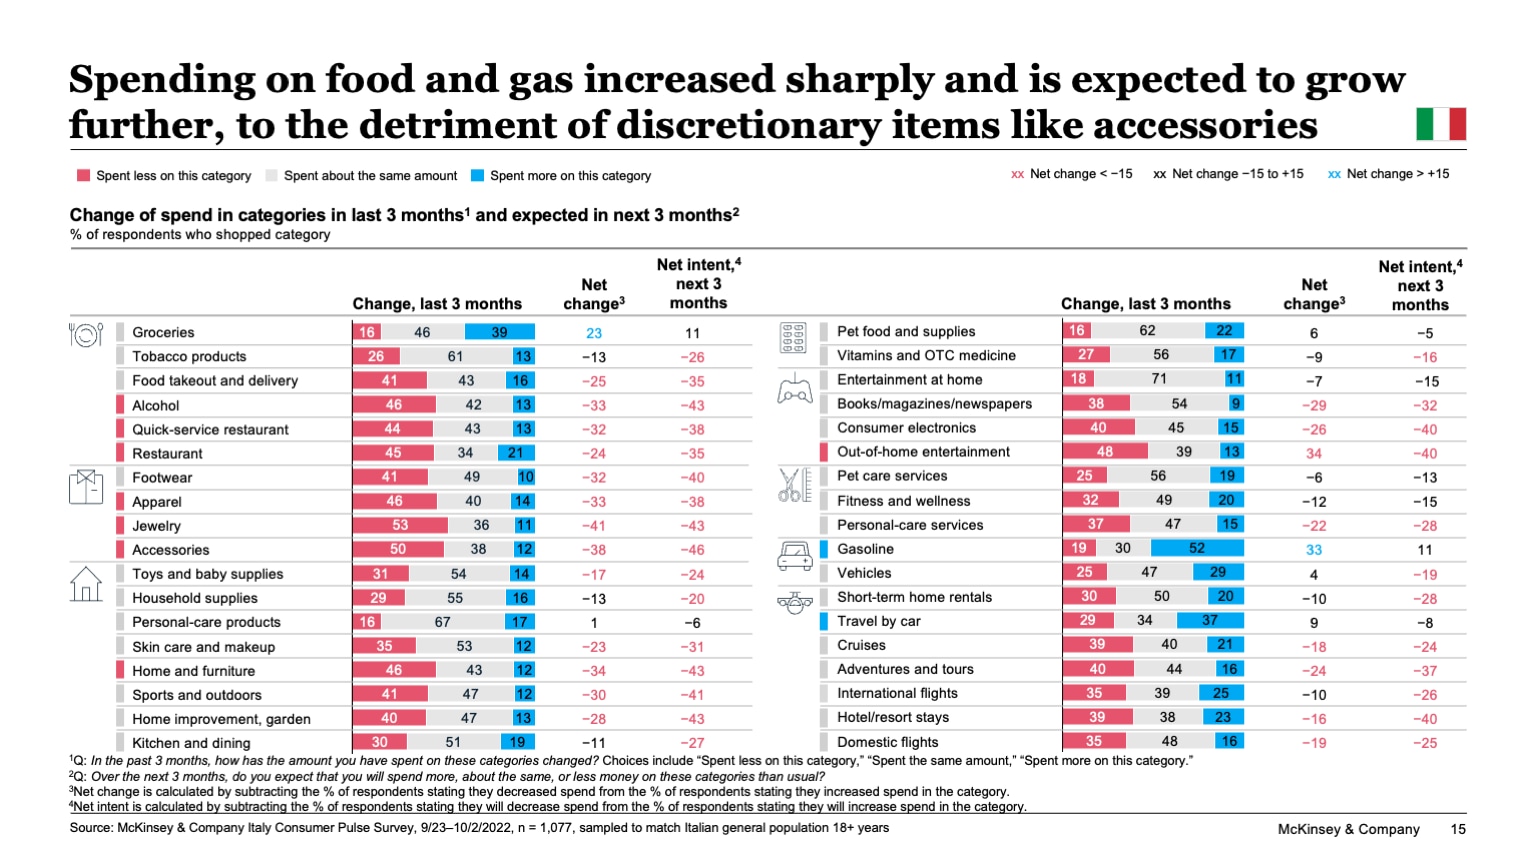 Spending on food and gas increased sharply and is expected to grow further, to the detriment of discretionary items like accessories